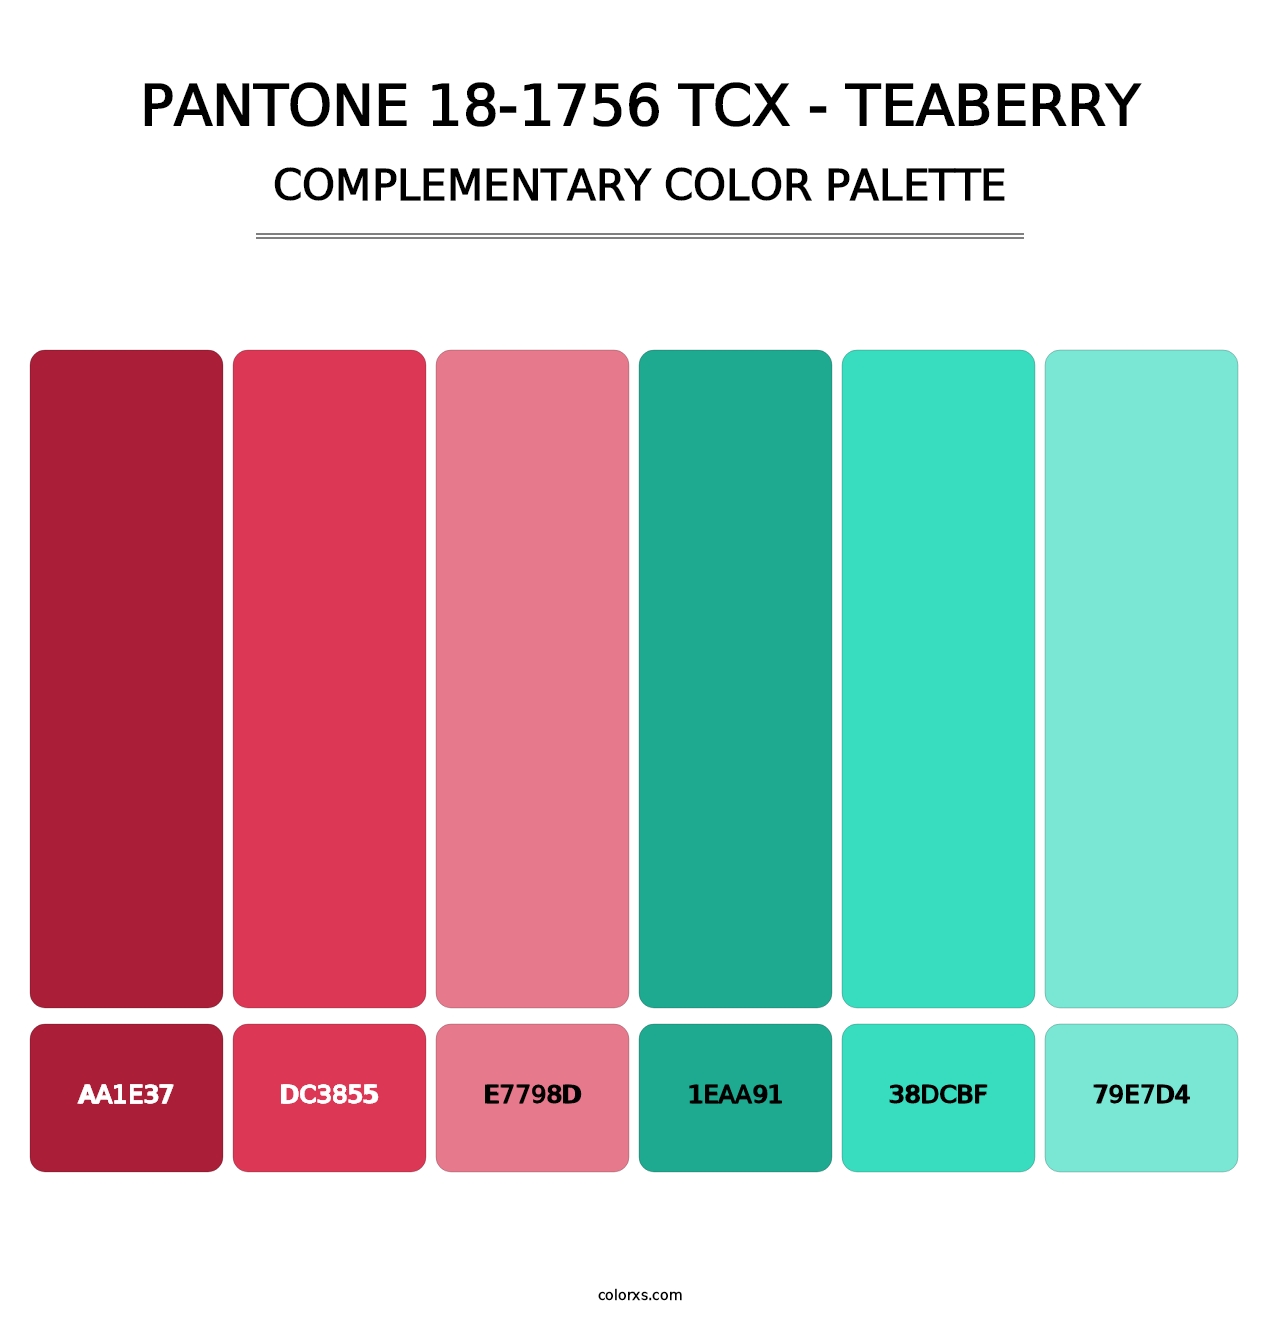 PANTONE 18-1756 TCX - Teaberry - Complementary Color Palette